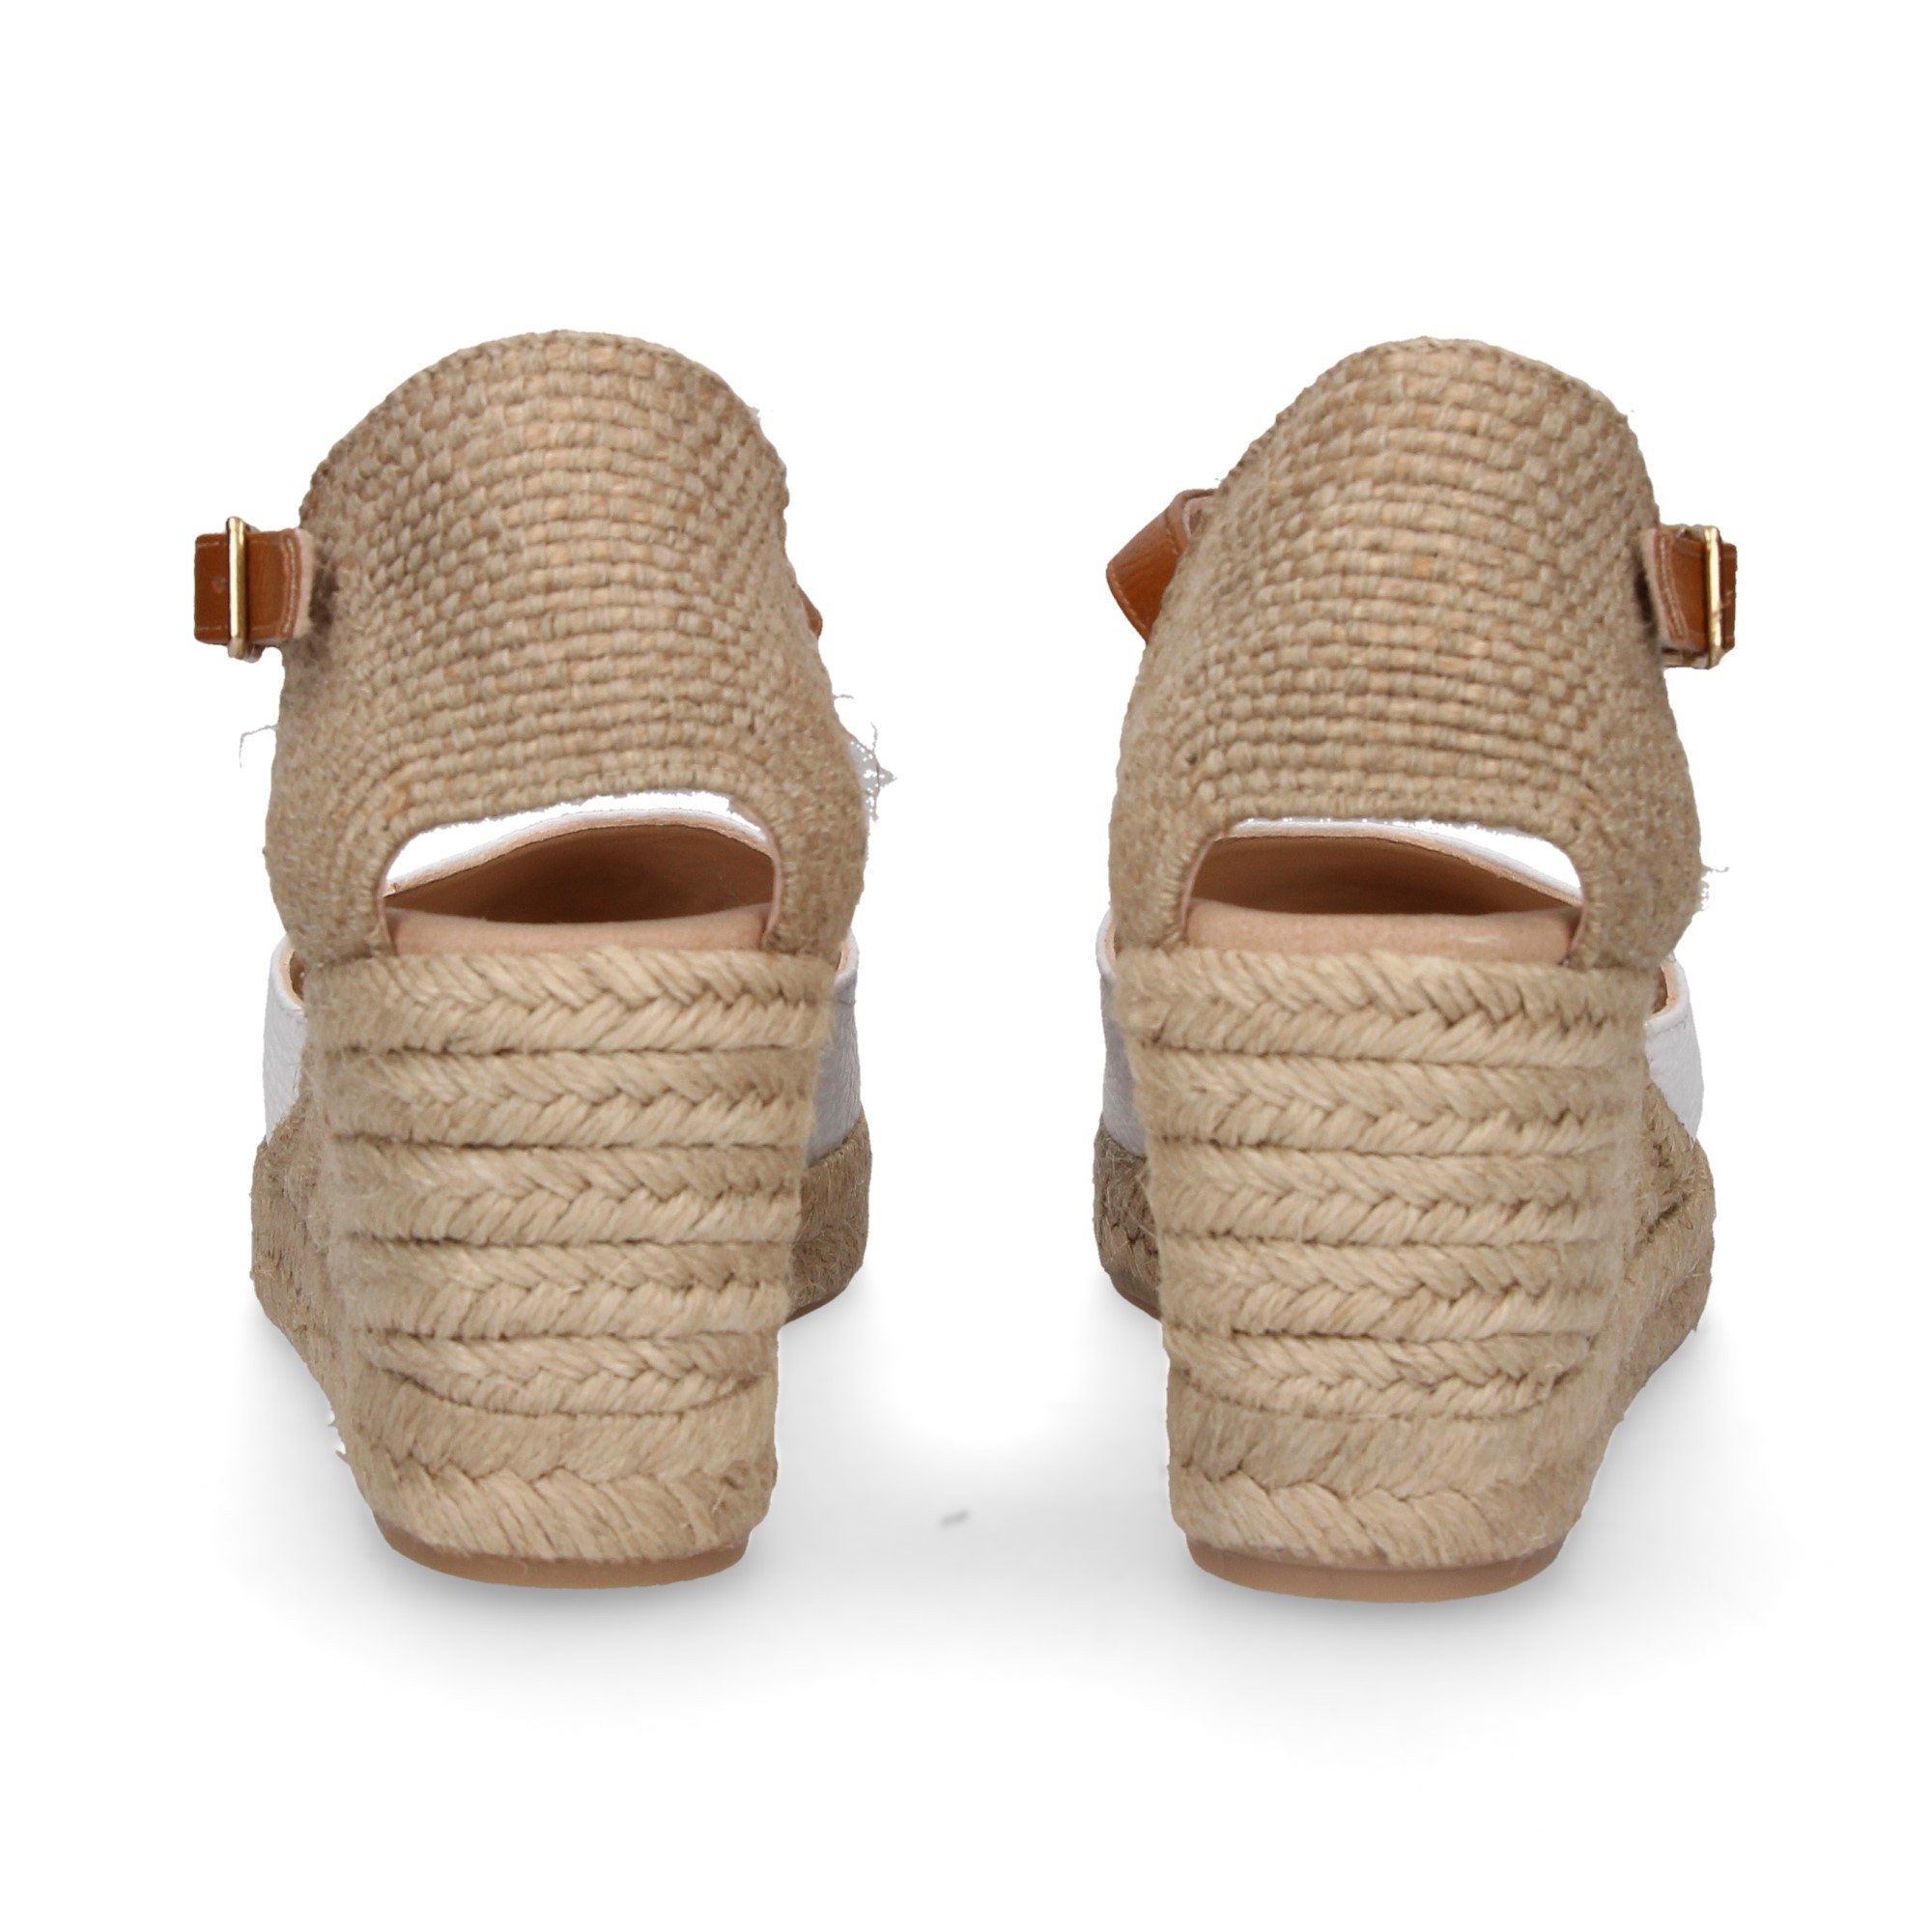 ESPADRILLE WEDGE ESPADRILLE ESPADRILLE MED MED WHITE LEATHER